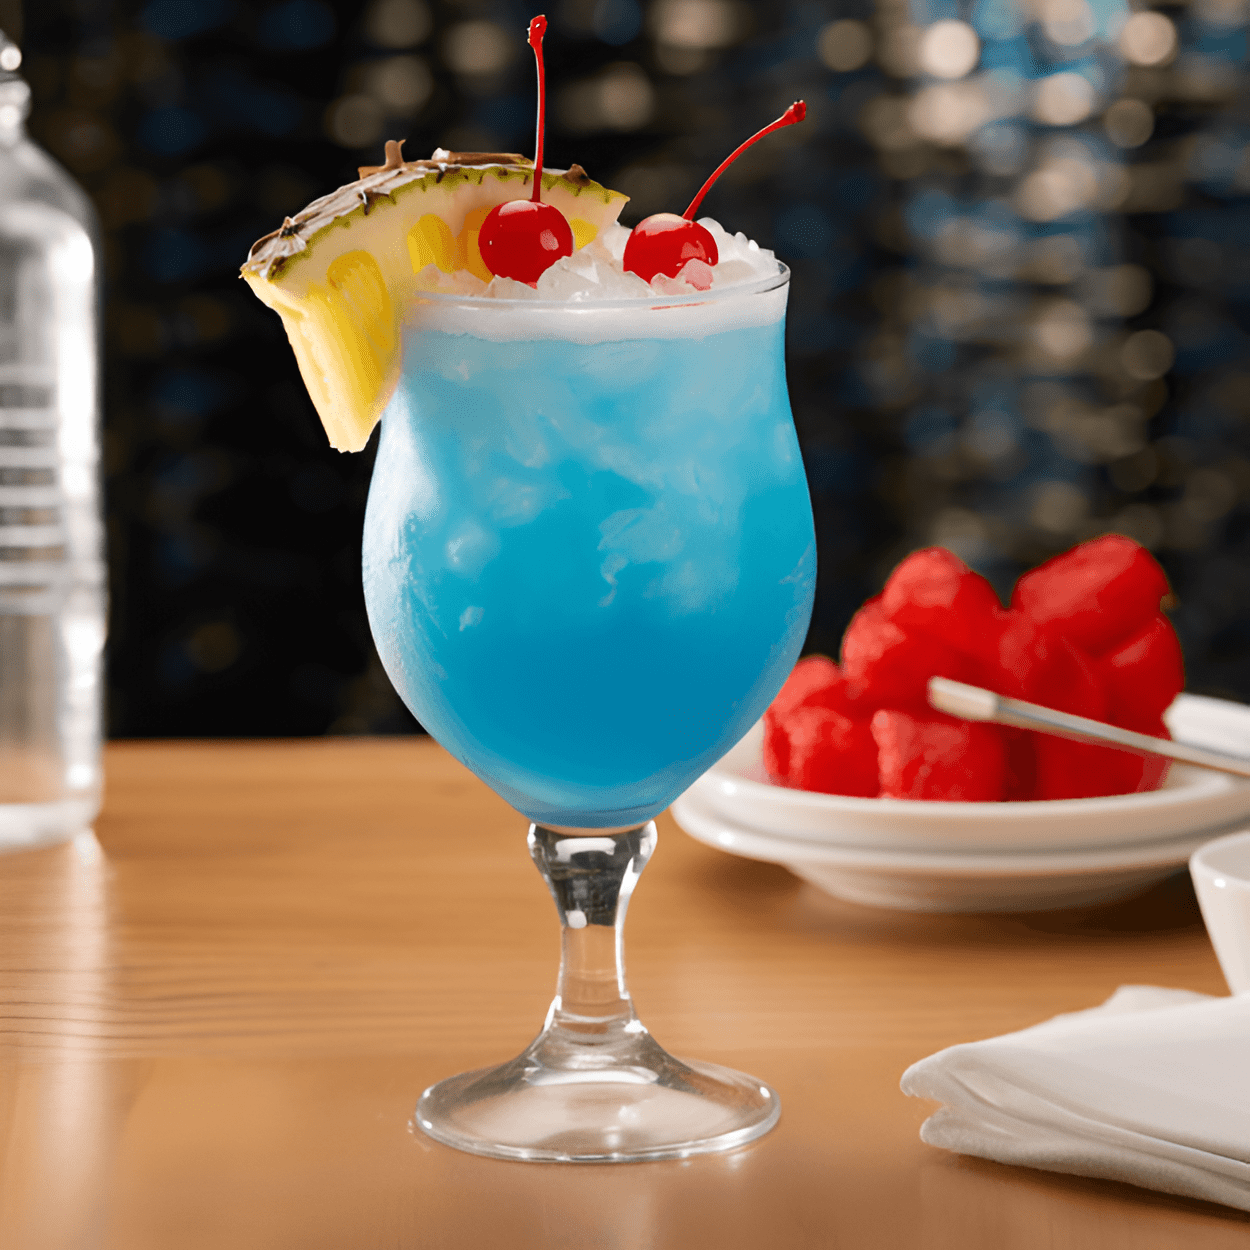 Hurricane Wave Frozen Cocktail Recipe - The Hurricane Wave Frozen cocktail is a delightful blend of sweet, sour, and fruity flavors. The sweetness of the pineapple juice is balanced by the tartness of the lime, while the coconut rum adds a tropical twist. The blue curaçao gives it a unique, slightly bitter taste that cuts through the sweetness, making it a well-rounded and refreshing cocktail.